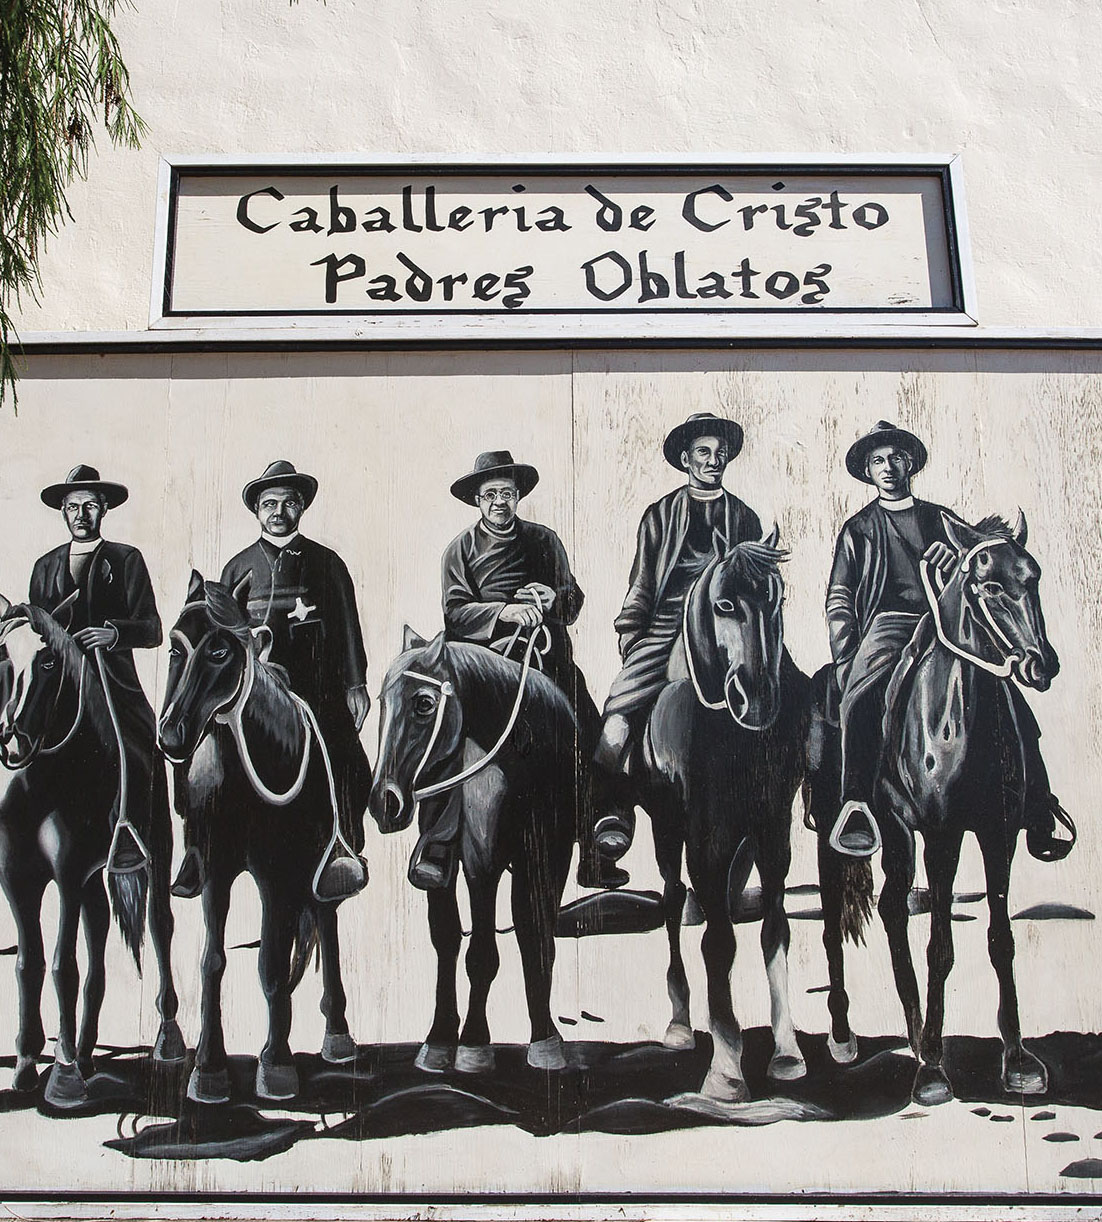 A black and white painted mural of men on horseback